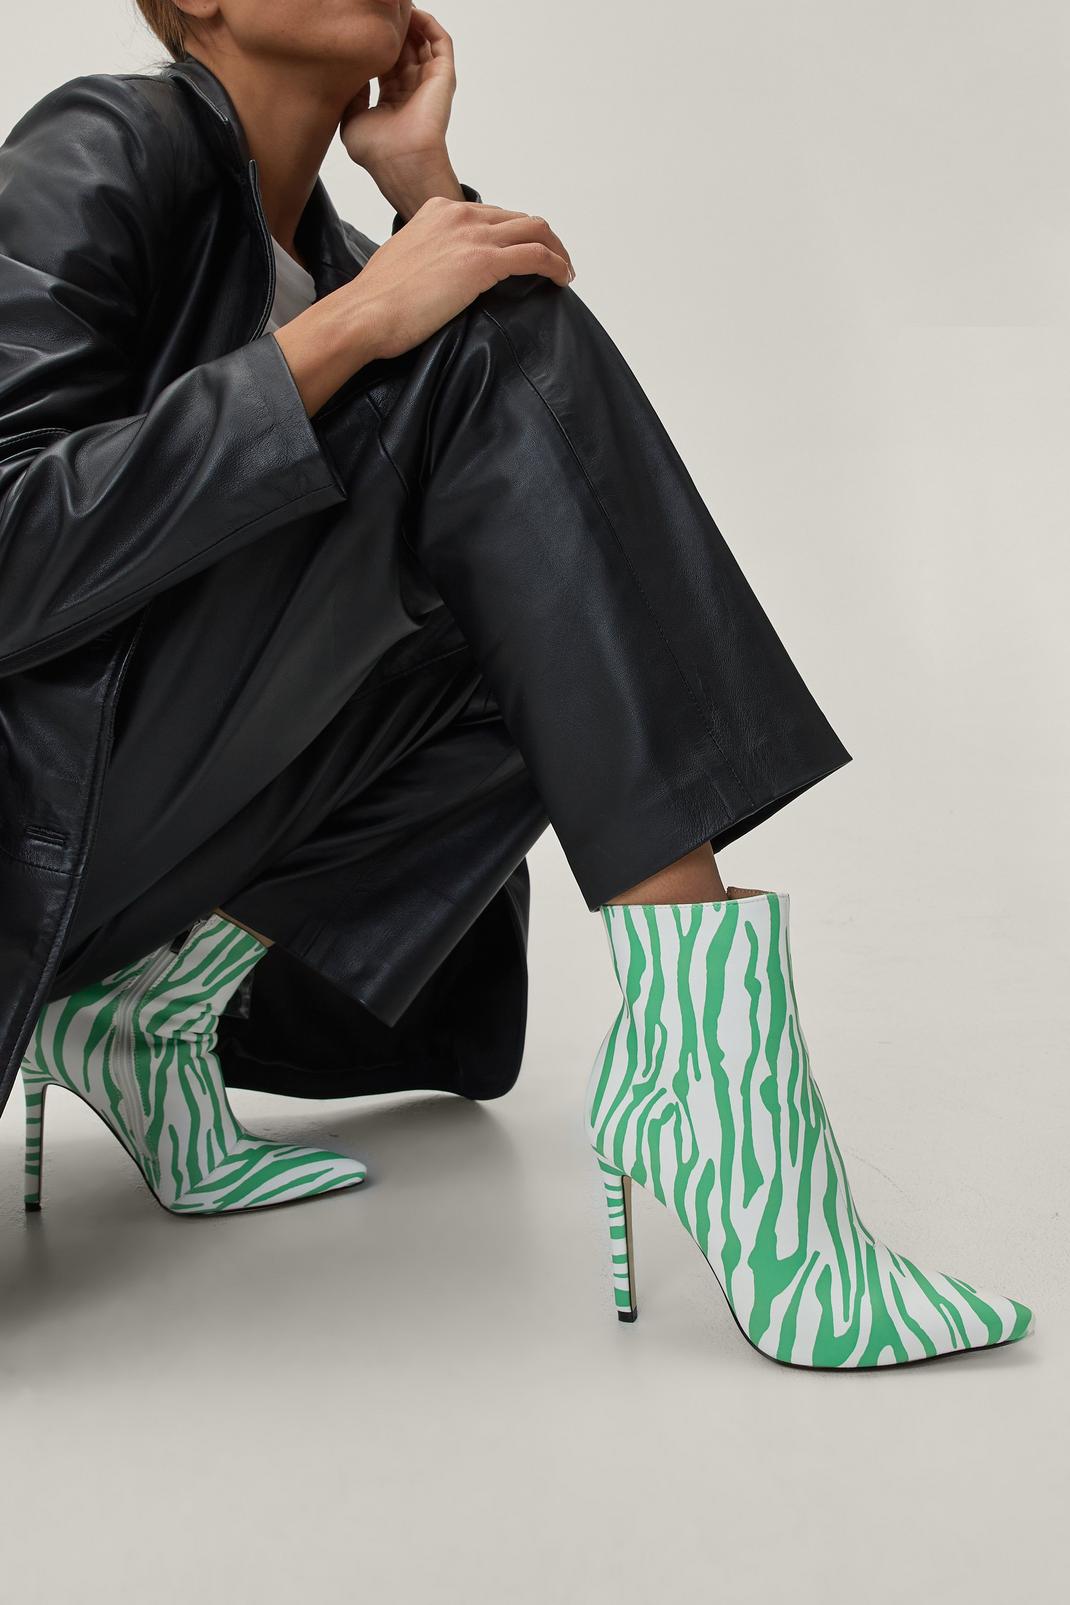 Green Zebra Print Stiletto Ankle Boots image number 1